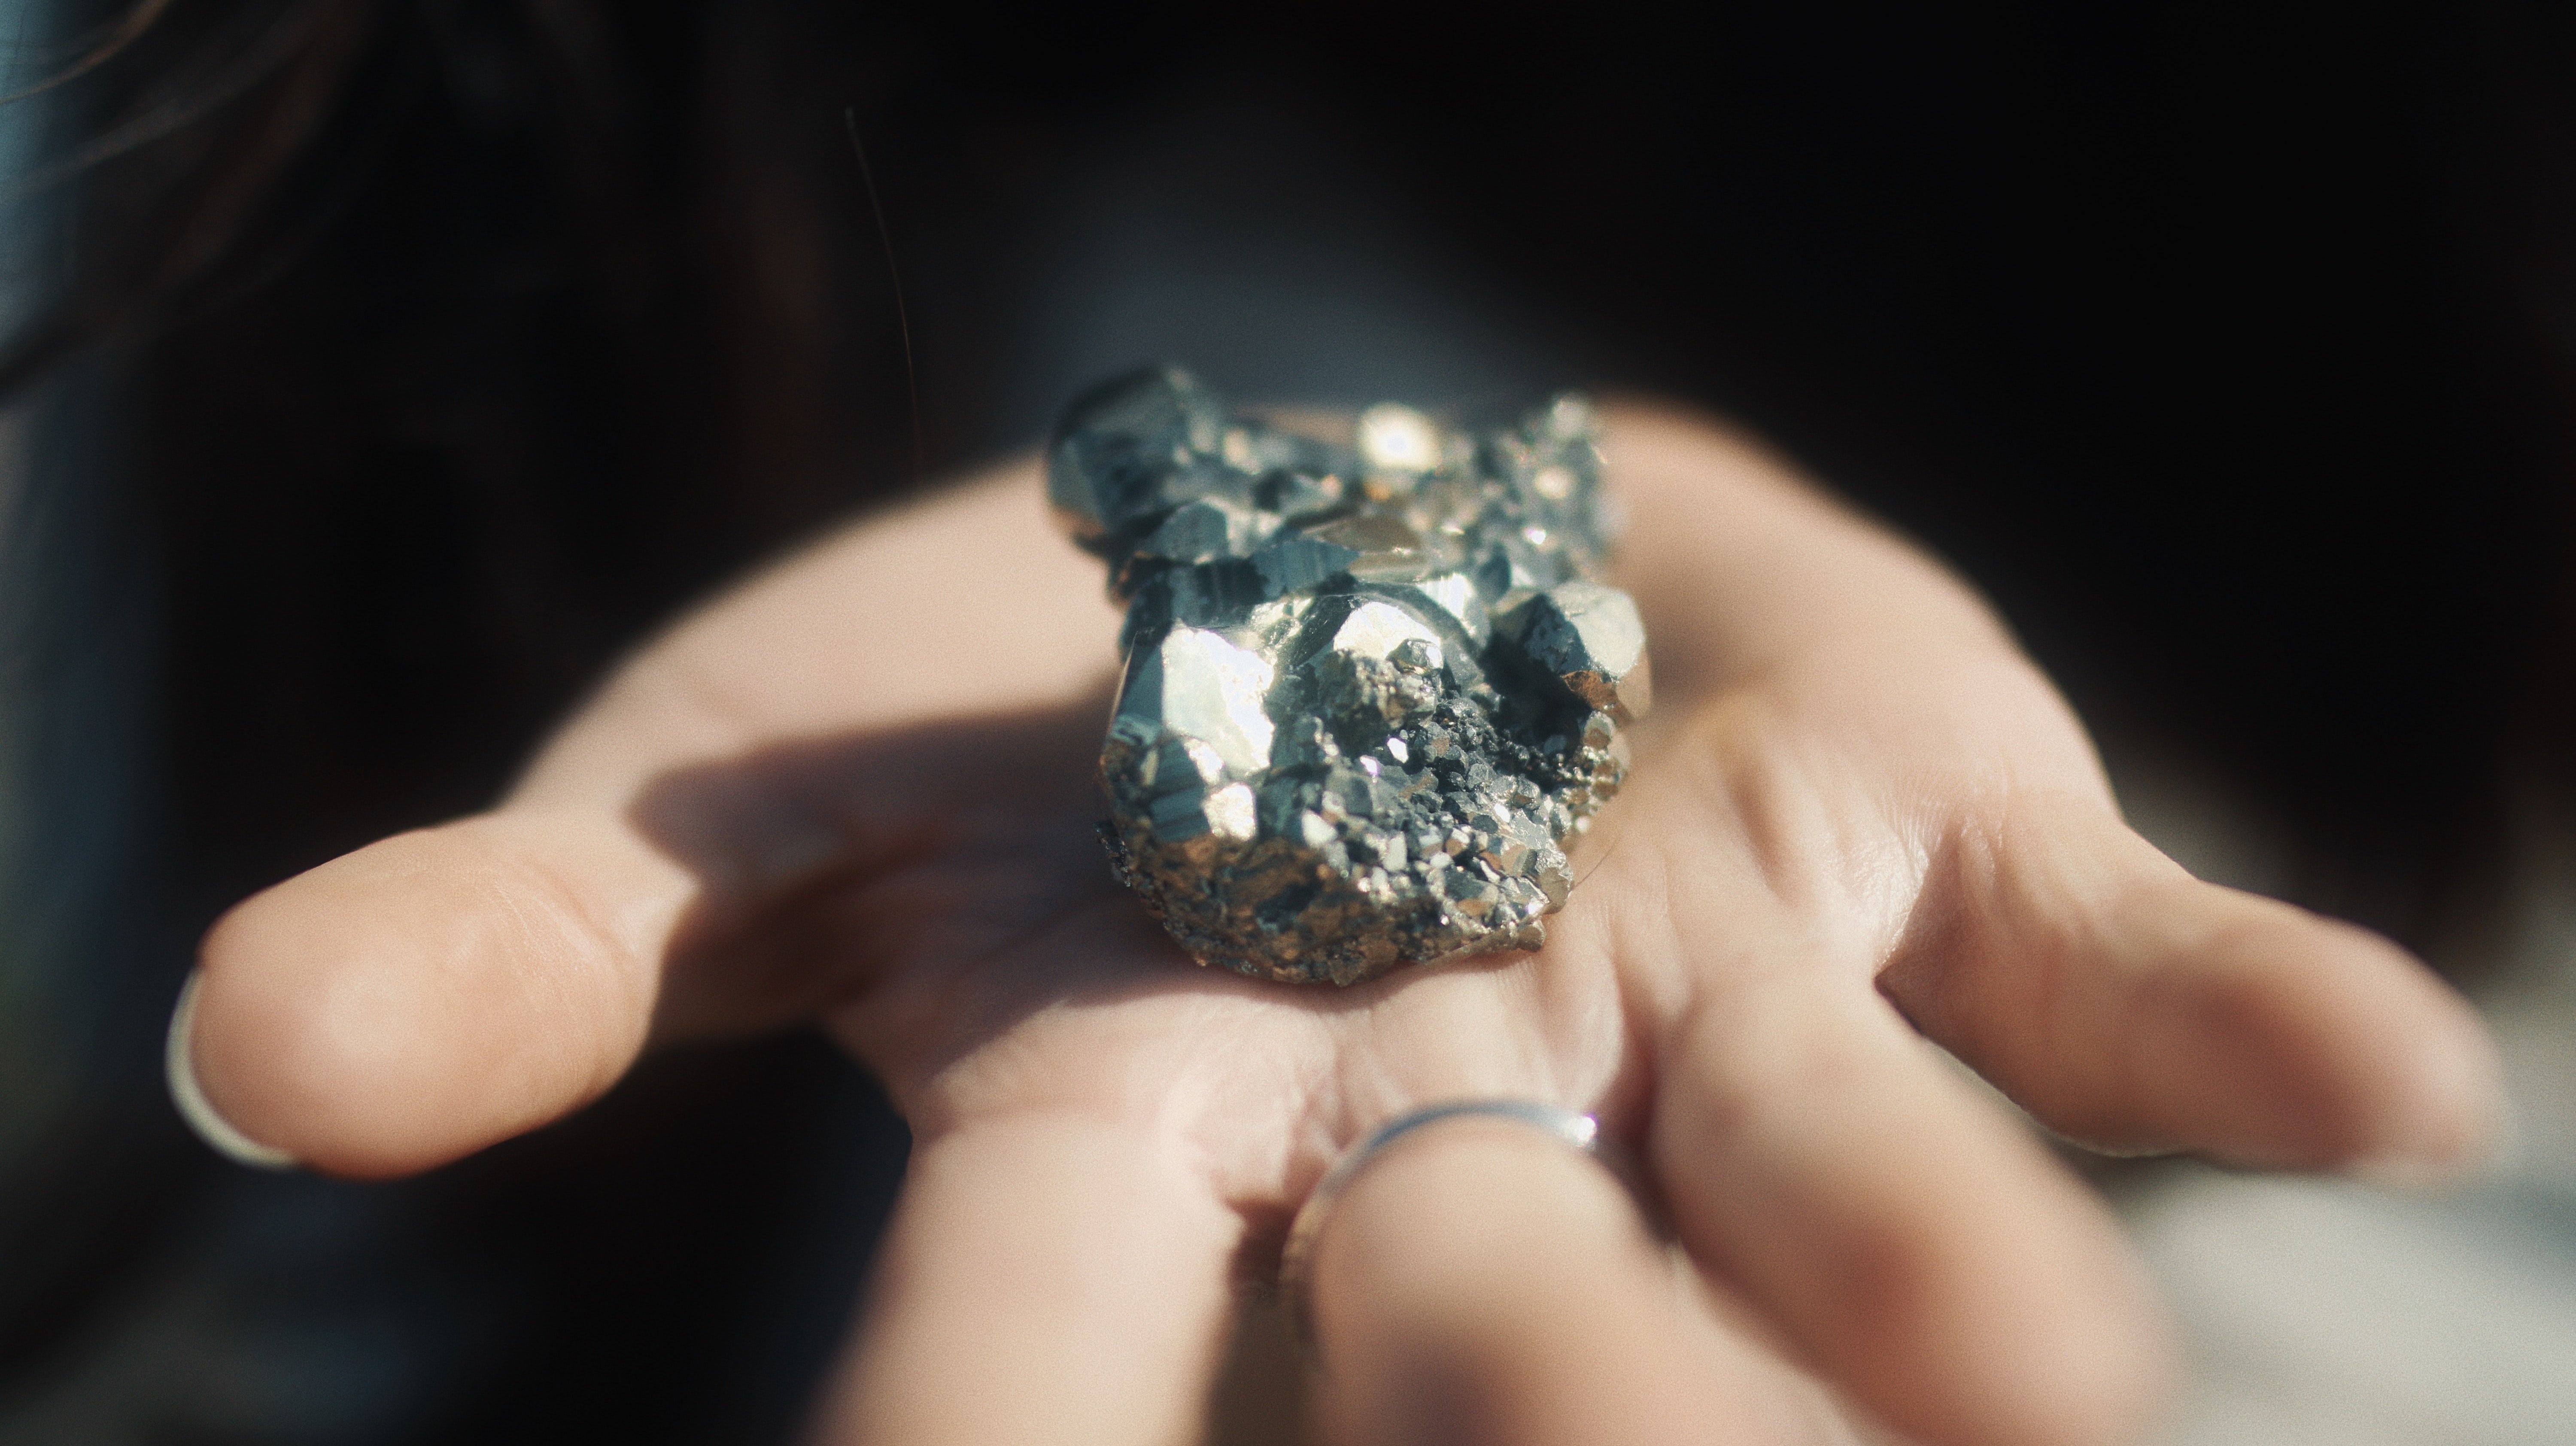 An open hand holds a precious gem that is still in its natural form | Photo: Unsplash/Elia Pellegrini